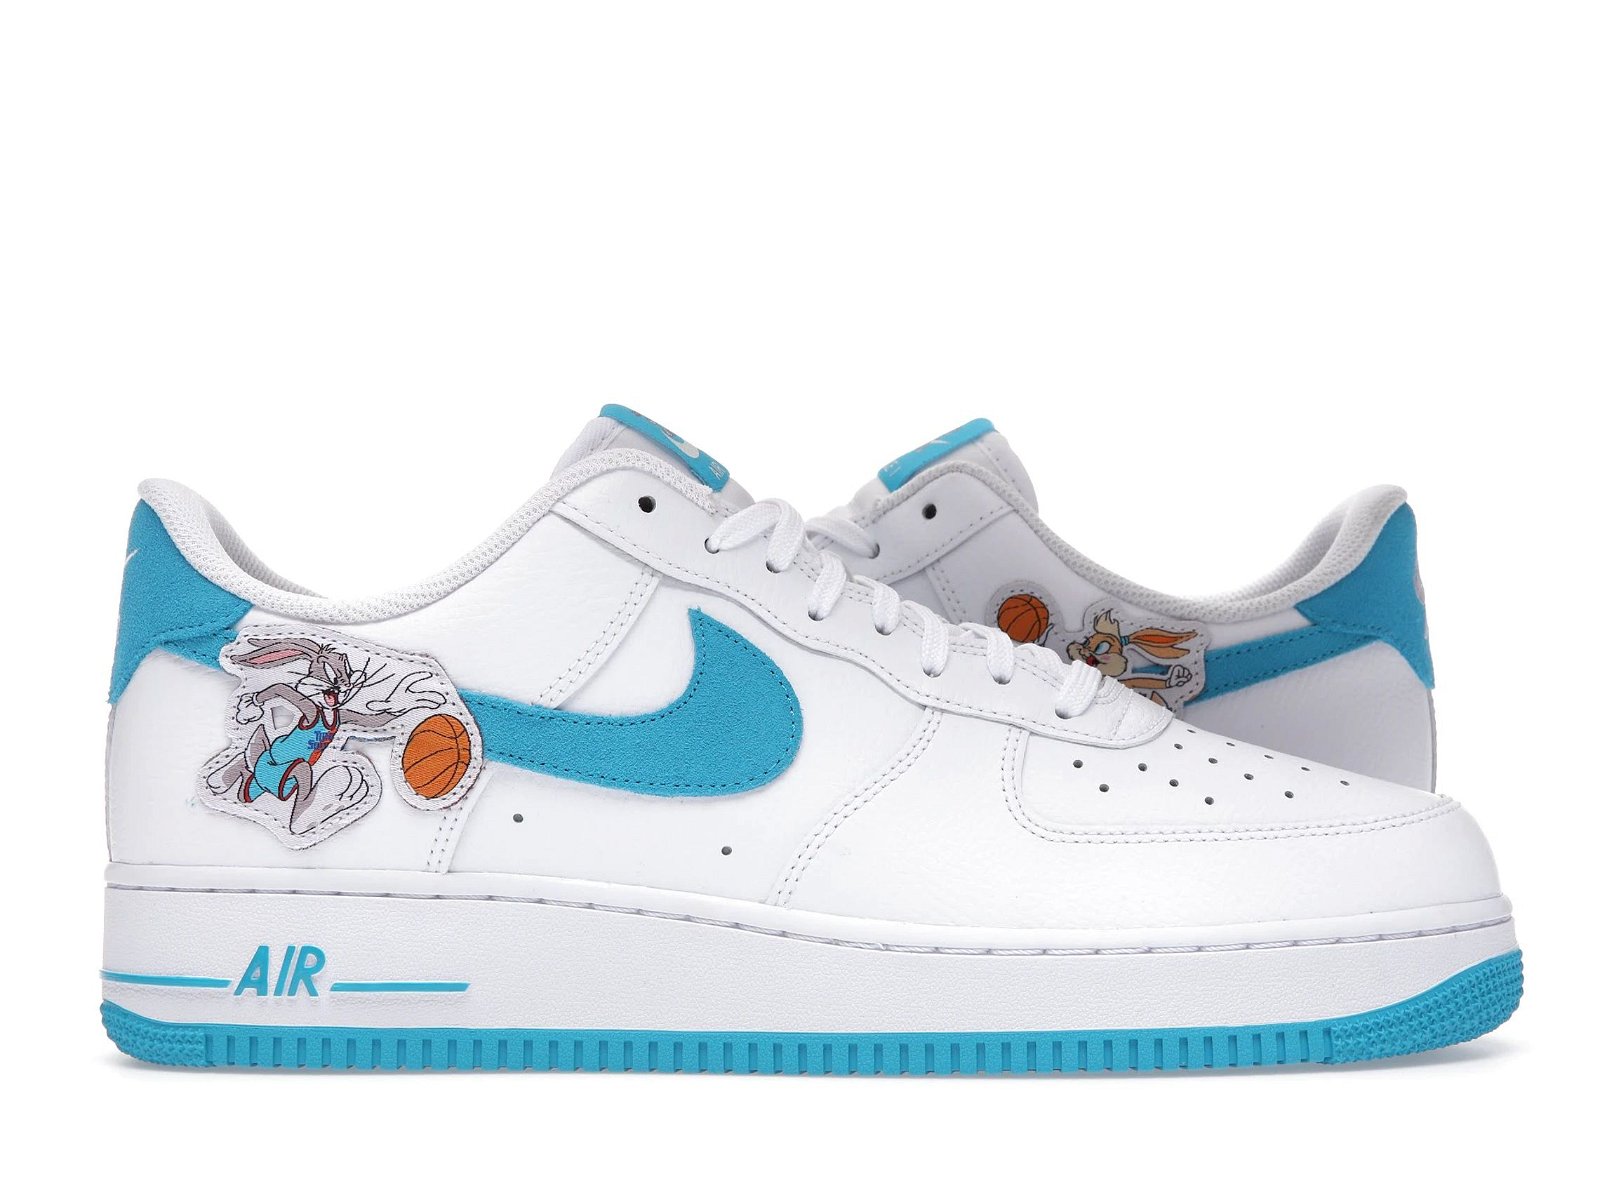 Space Jam x Air Force 1 '07 Low "Hare"